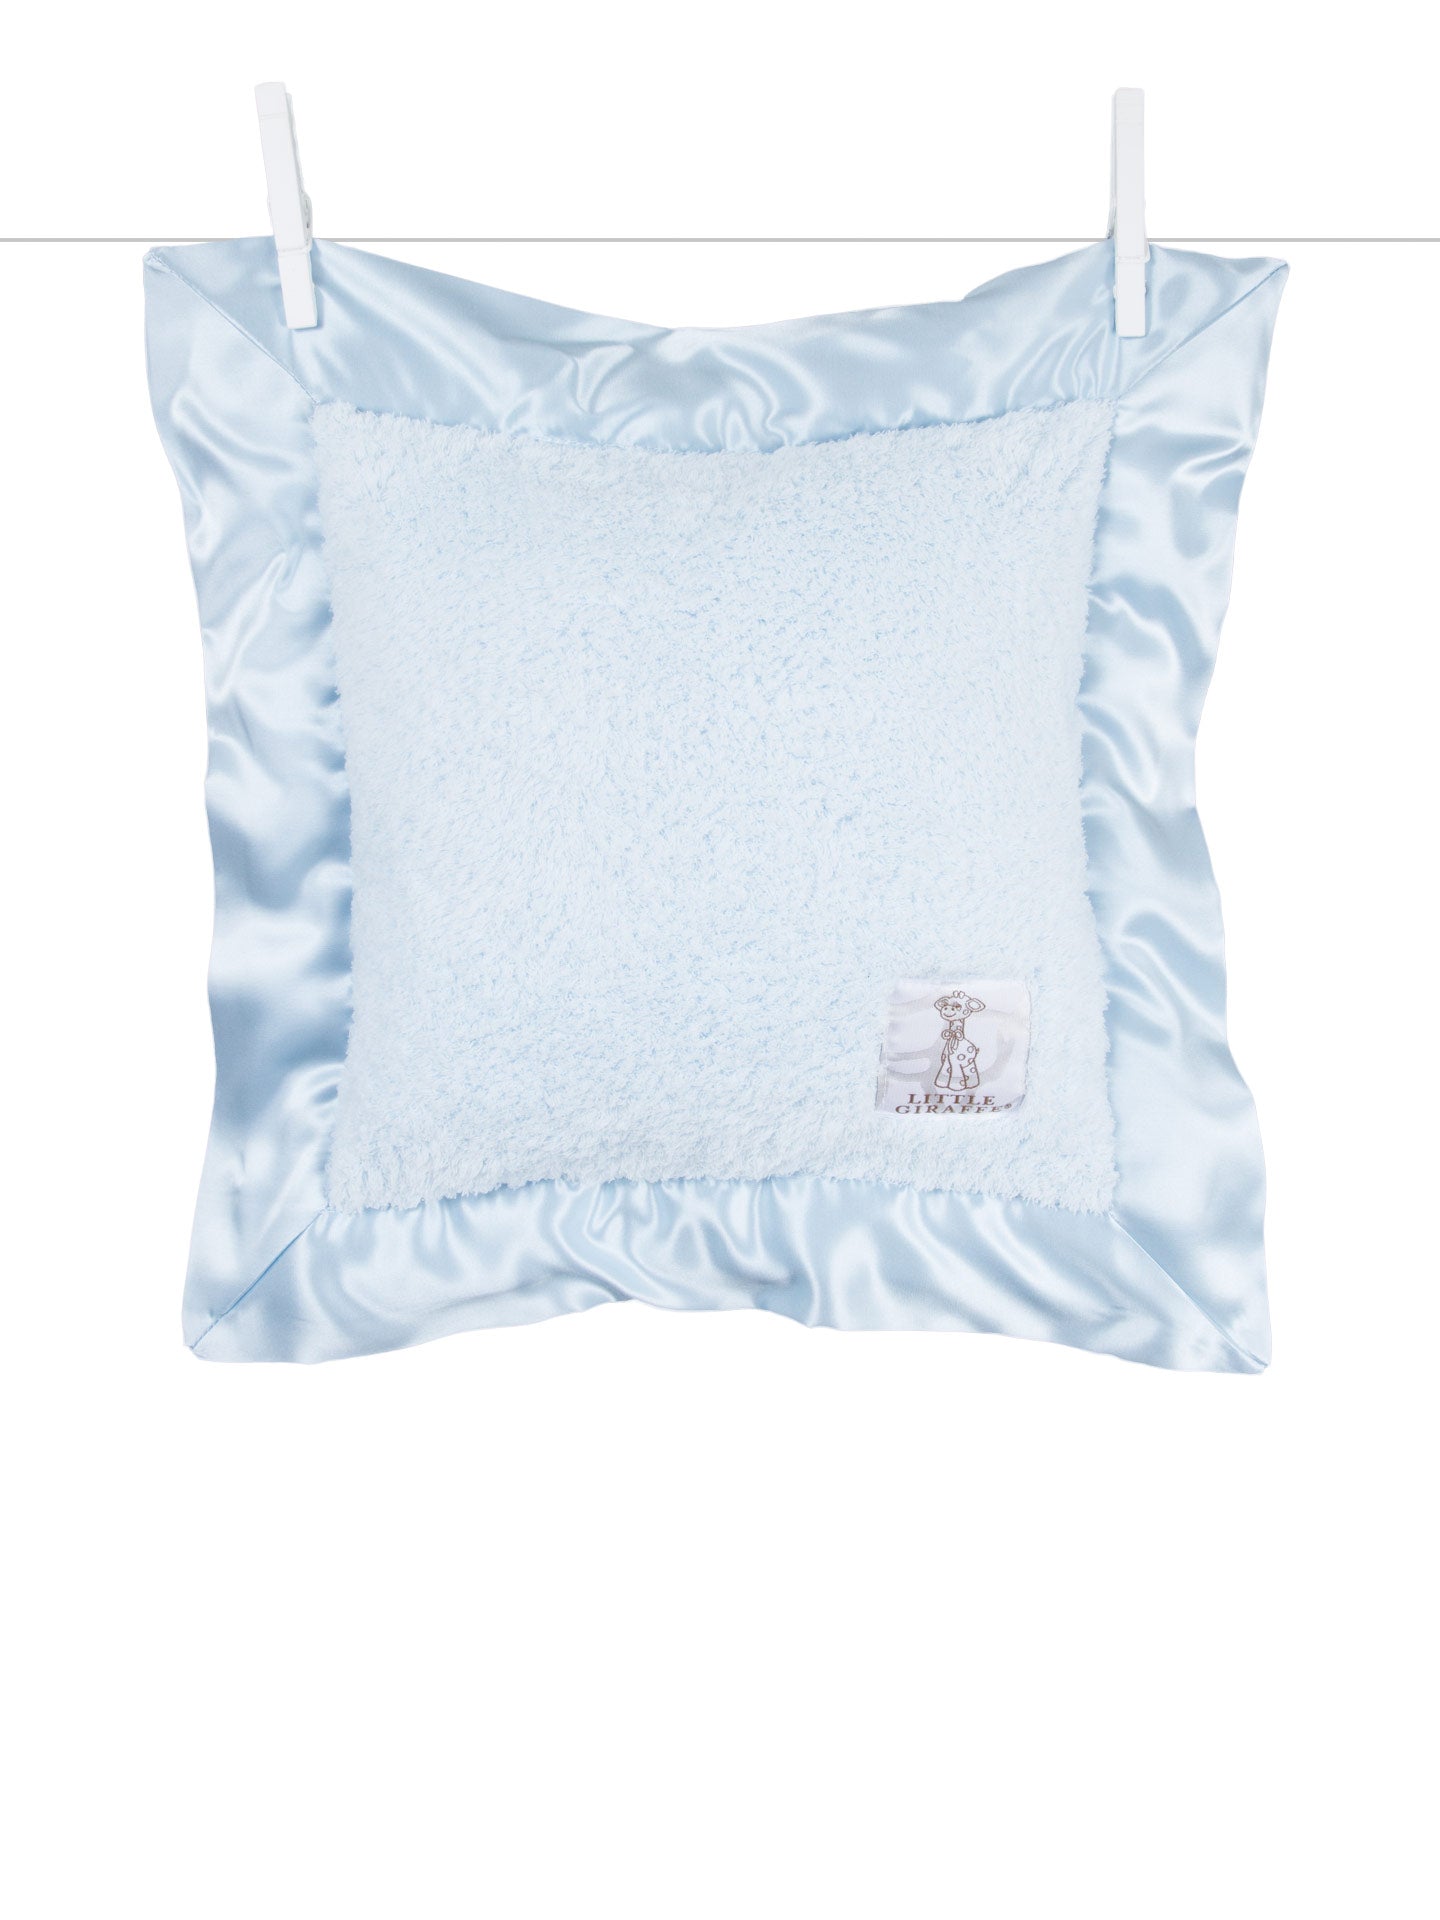 Chenille Baby Pillow-Blue